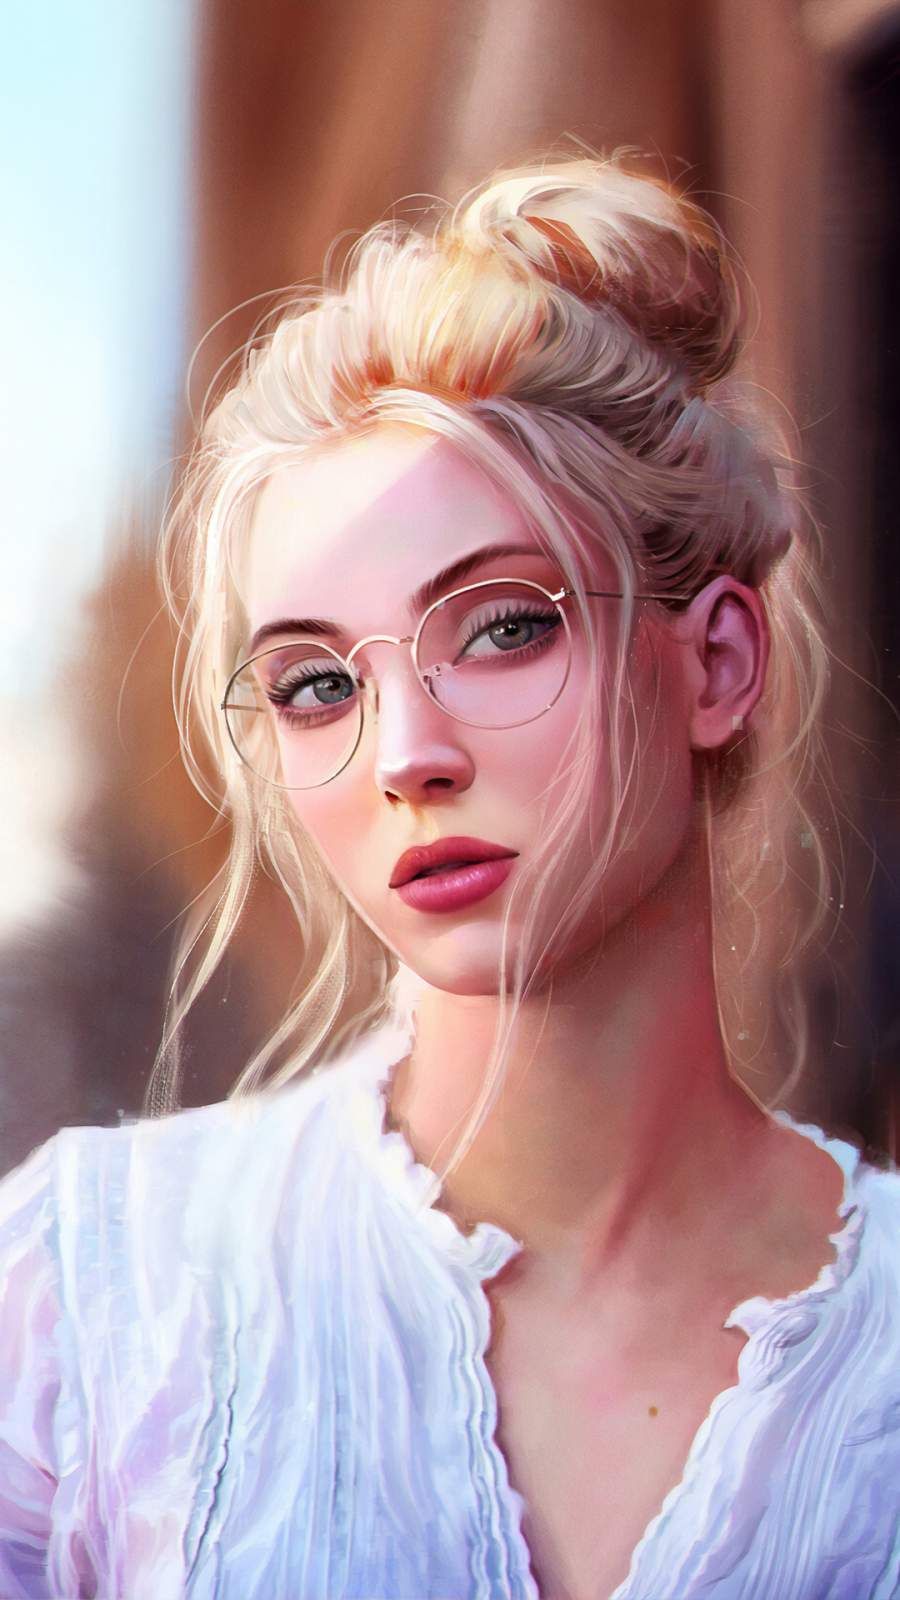 Girl with Glasses Artistic Portrait iPhone Wallpaper. Girls with glasses, Portrait girl, Blonde girl